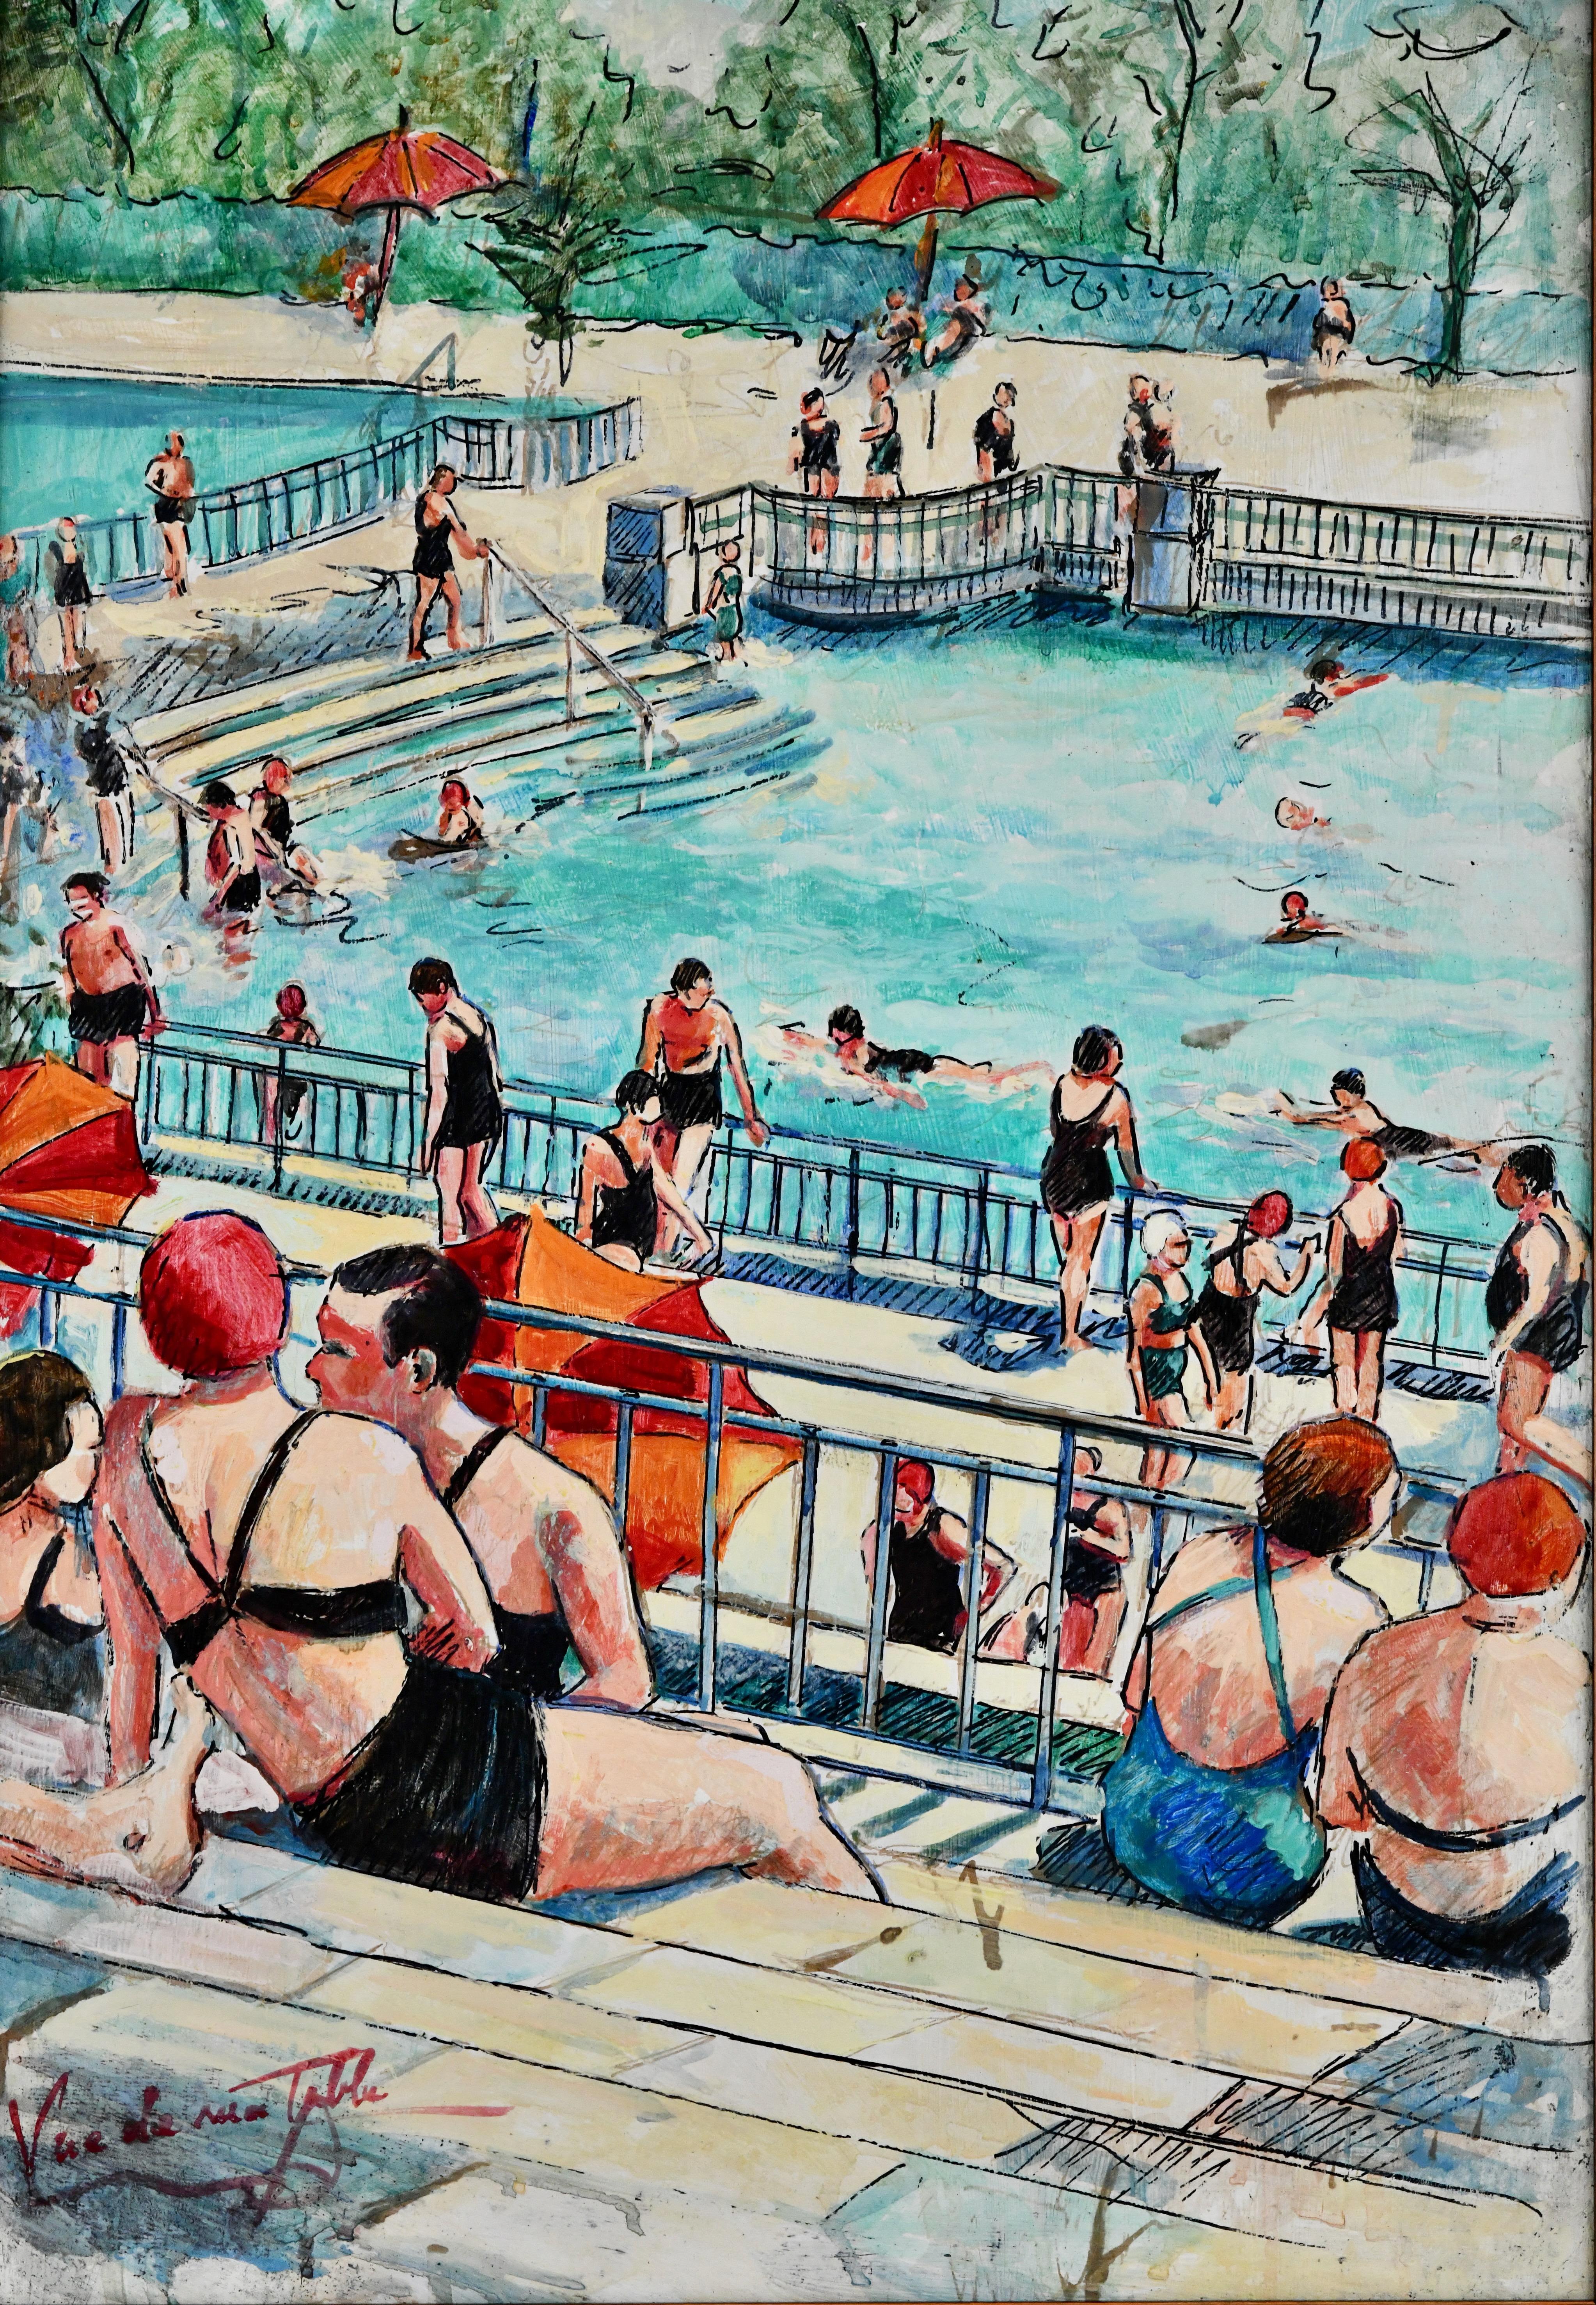 Art Deco painting swimming pool by Christiane Caillotin Vue de ma table. 
France ca. 1940.
Acrylic paint, watercolor on board. Framed. 
Christiane CAILLOTIN 
French 20th century painter, born in Coye la Forêt and died in 1984, formed by Adler,